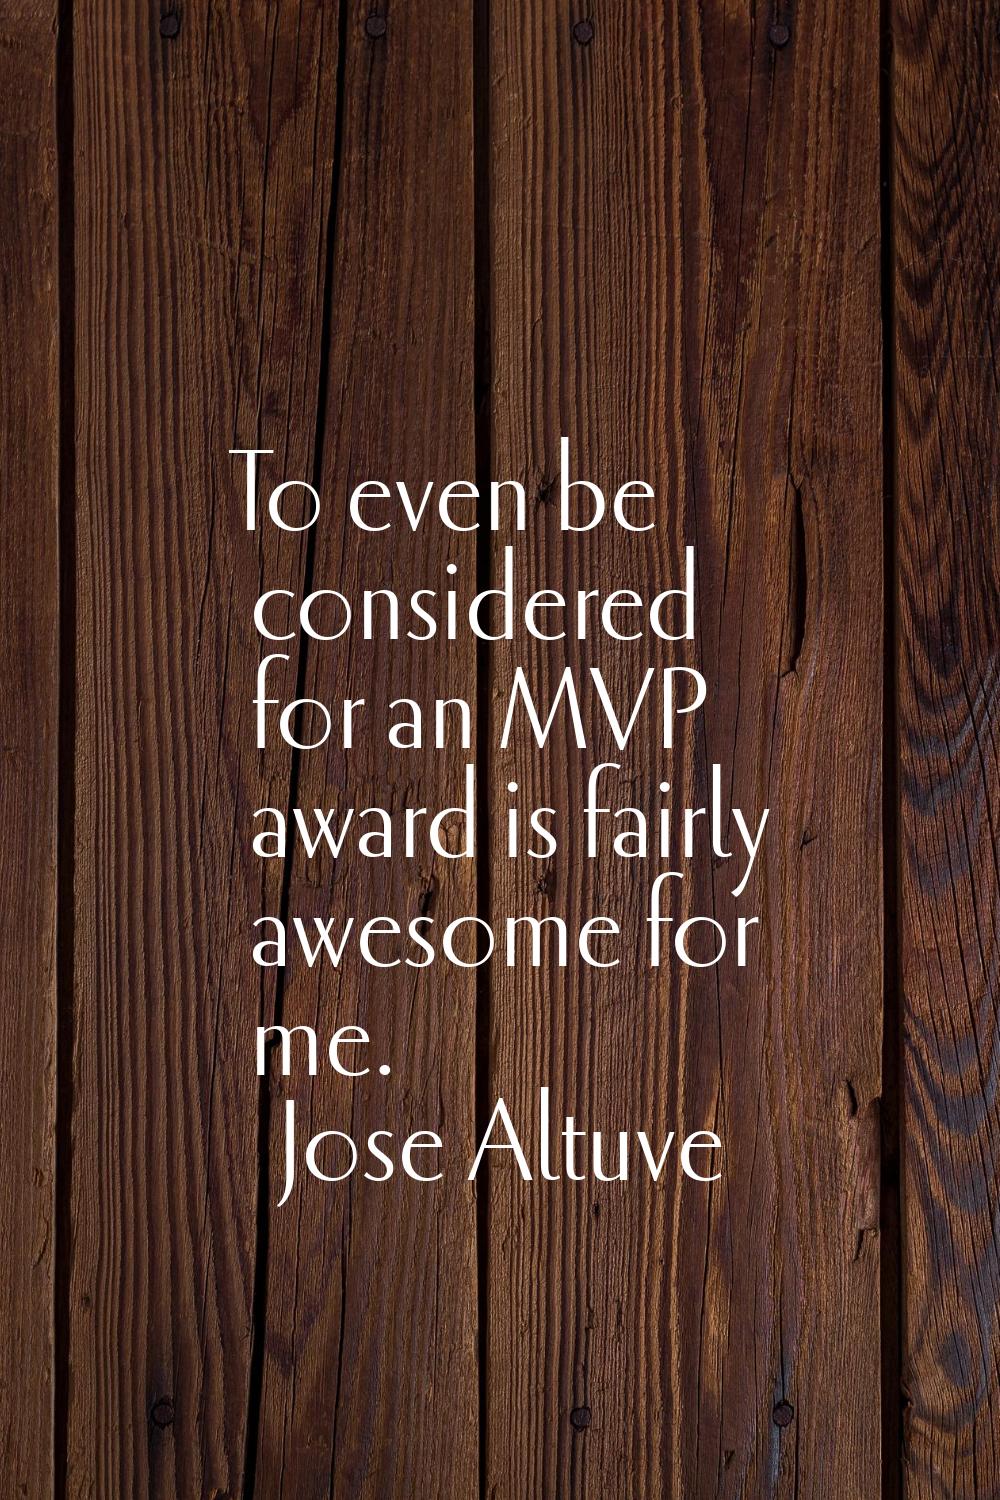 To even be considered for an MVP award is fairly awesome for me.